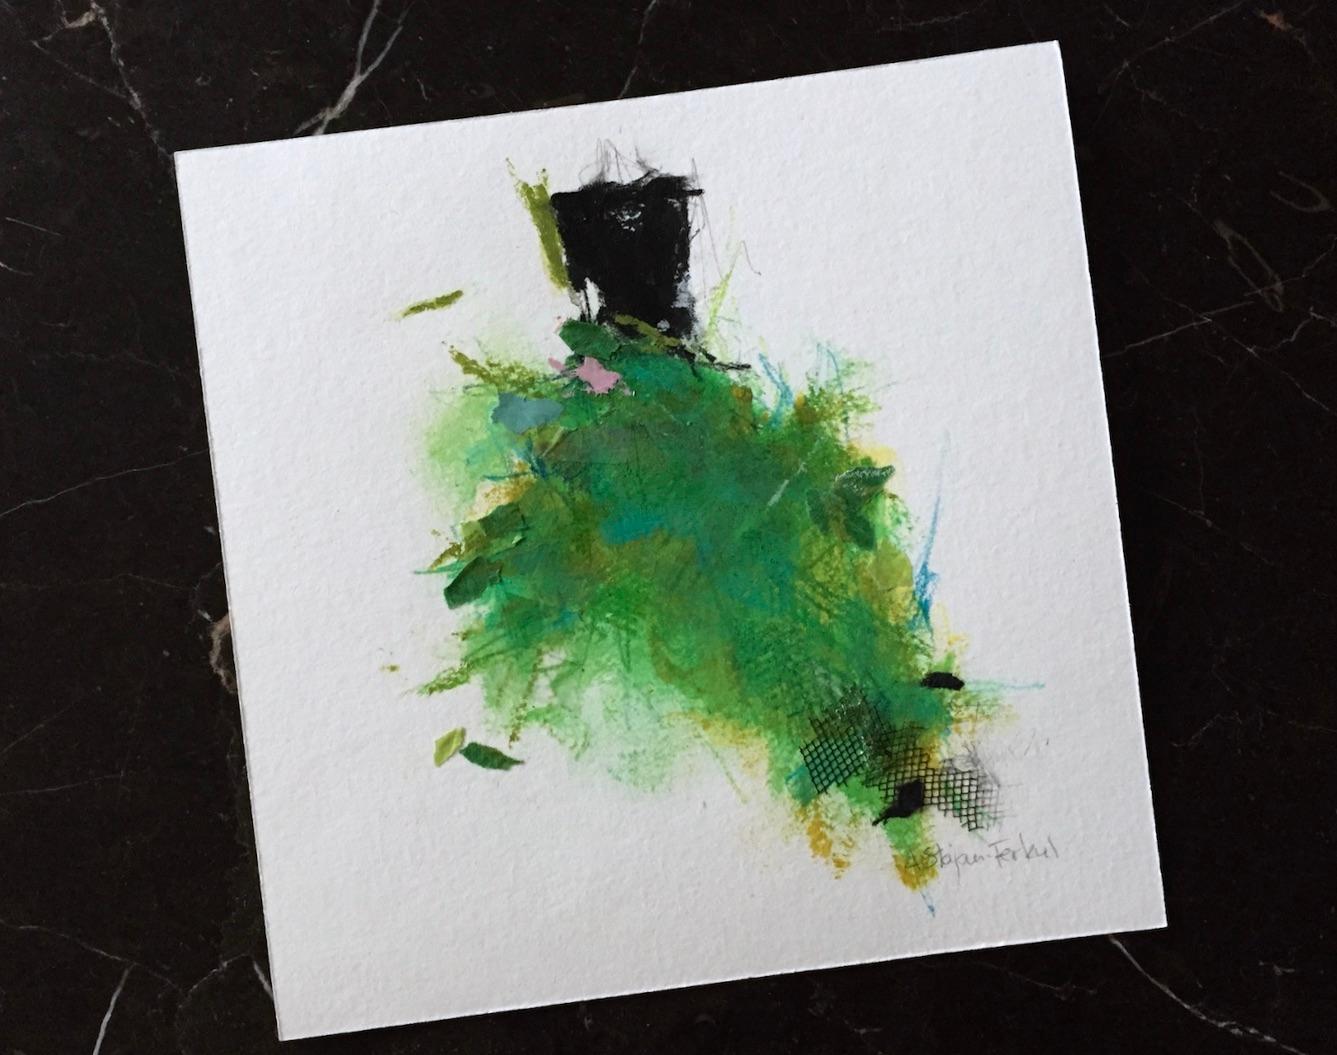 This delicate green and black dress is an artwork on paper blending paint, color pencil and collage elements. Intuitive mark-making and loose textured detail create an impressionistic composition with an outcome both expressive and refined. Variants